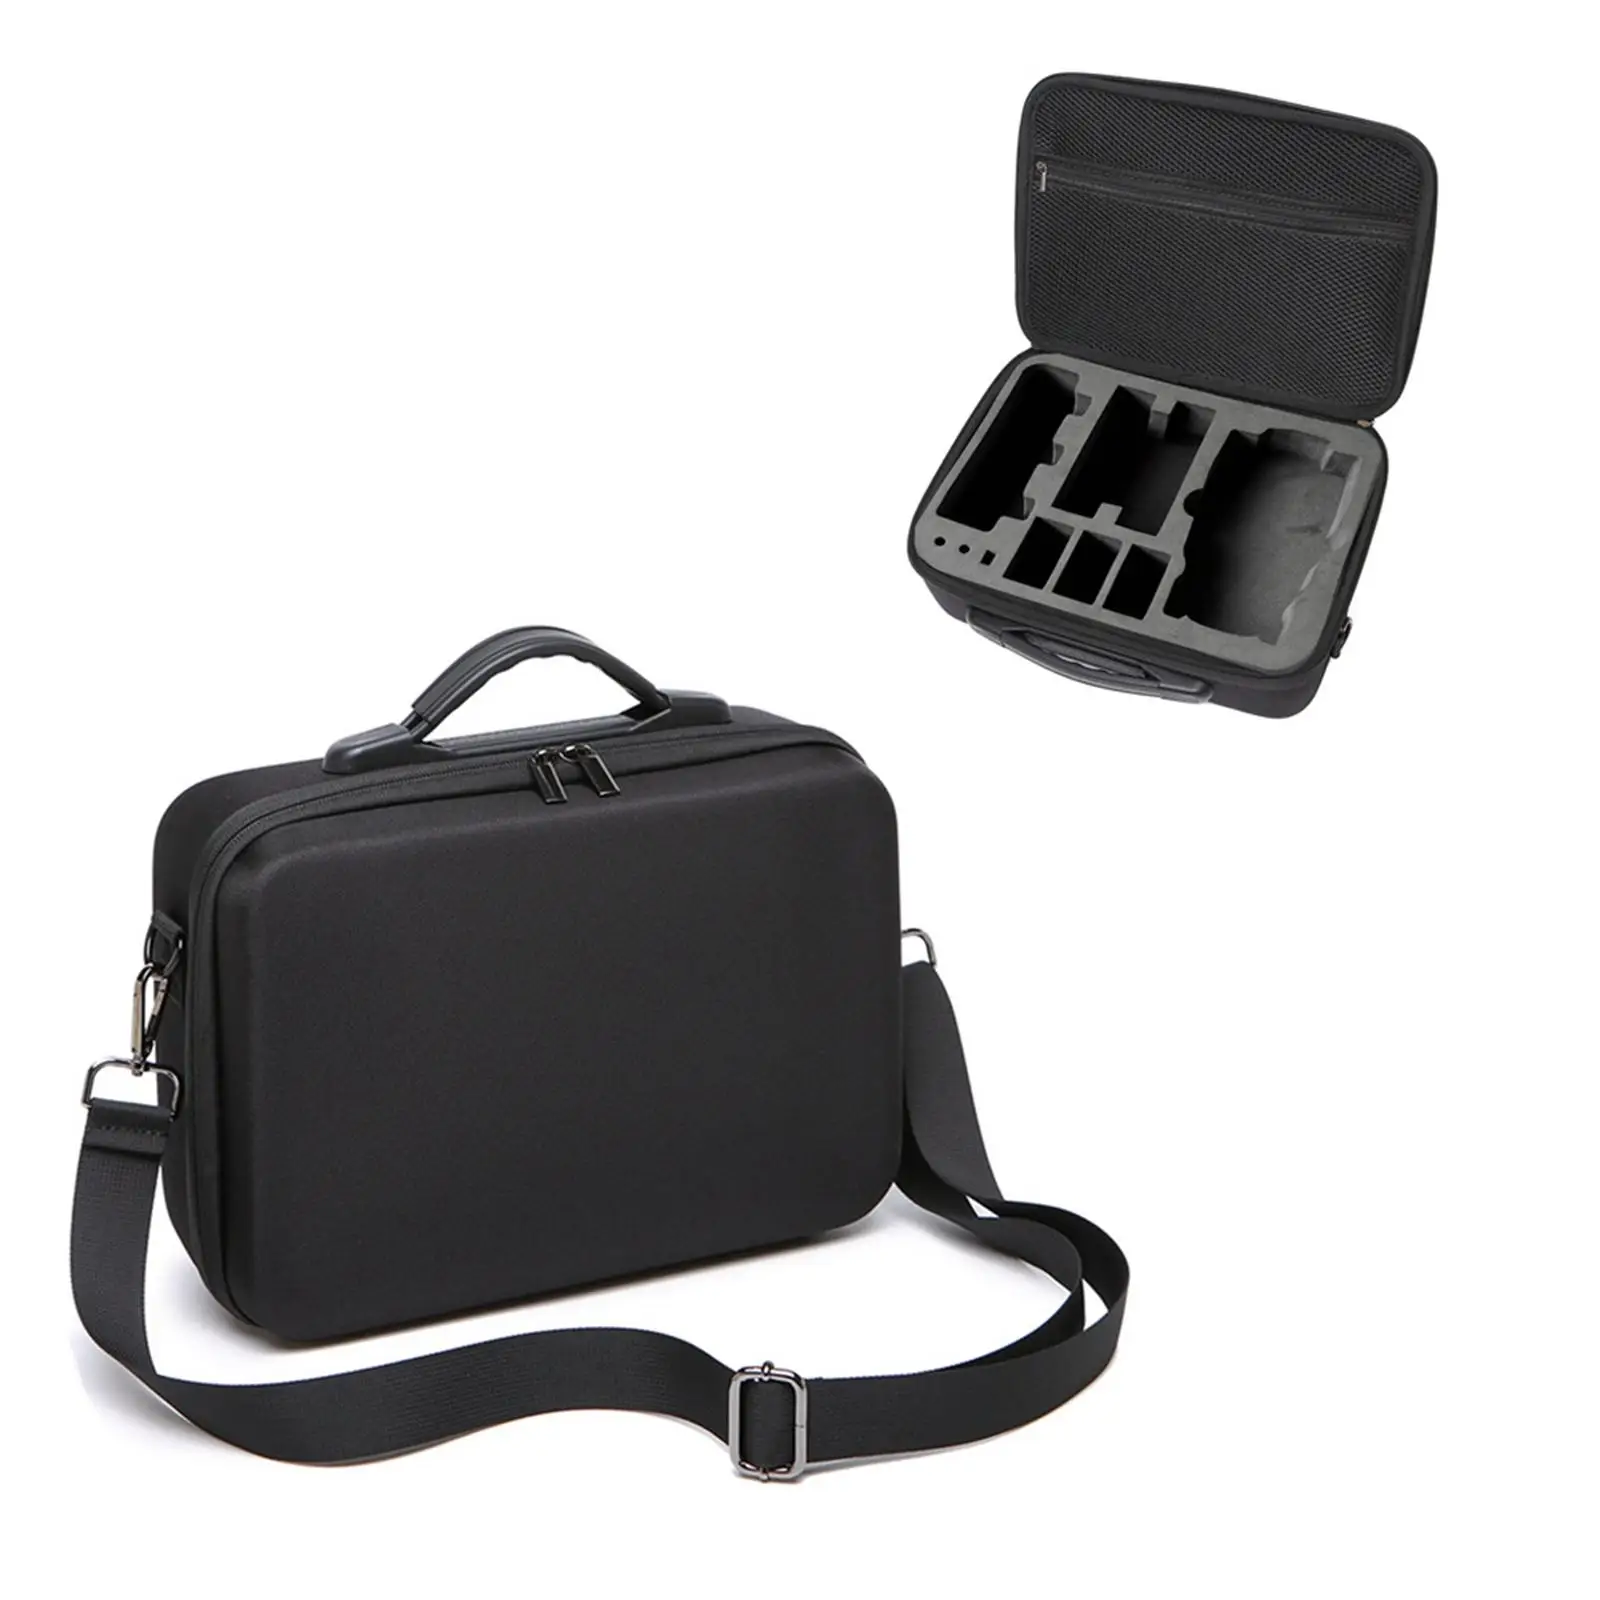 Handbag Storage Bag Carrying Case for MAVIC Air1 Drone Controller Batteries Accessories